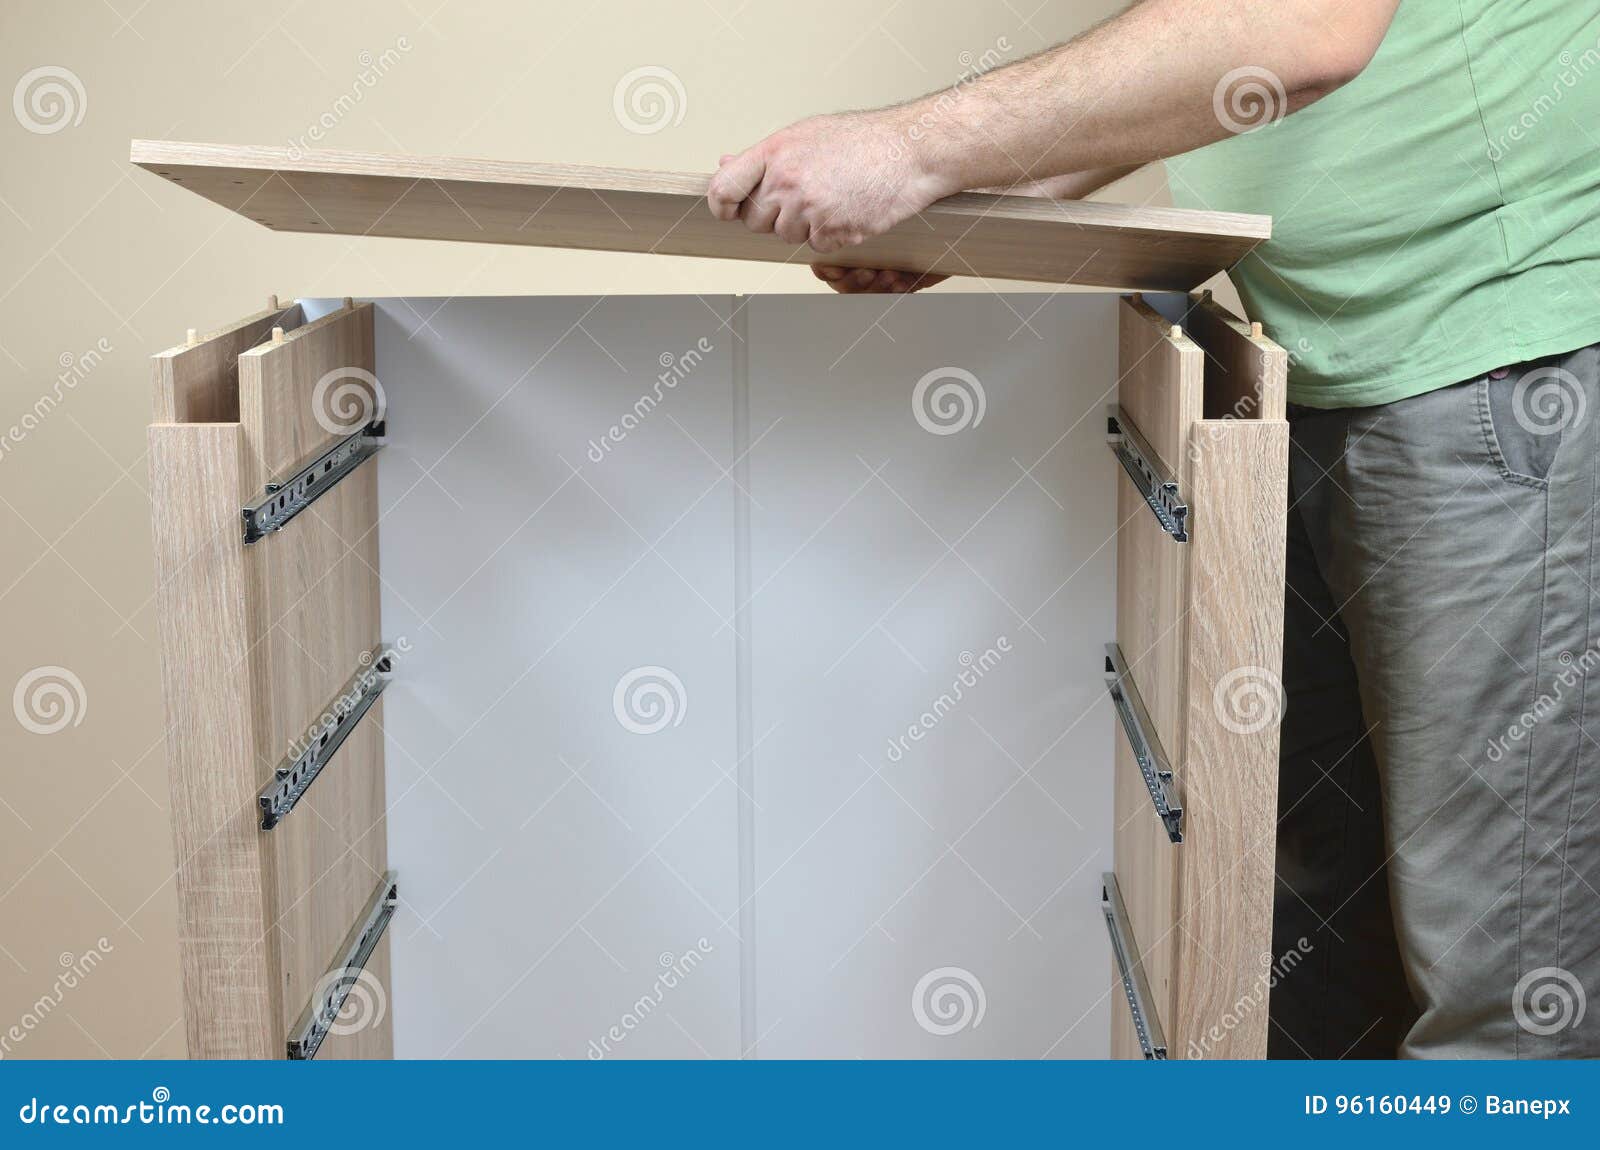 Assembling A New Dresser Stock Image Image Of Construction 96160449